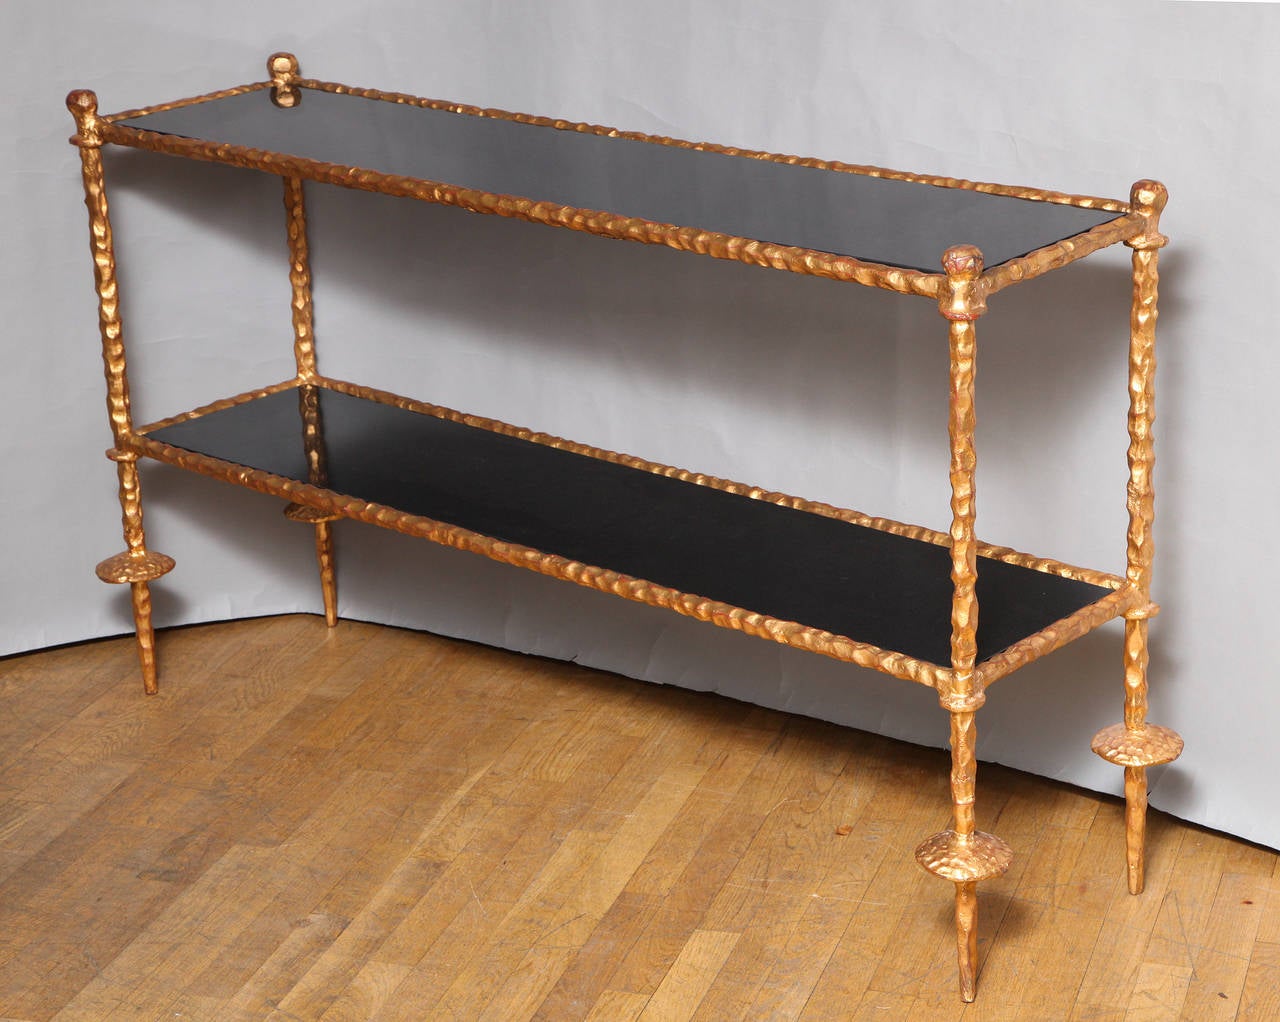 A two tiered gilt iron Giacometti style sofa table/étagère with polished black granite surfaces.